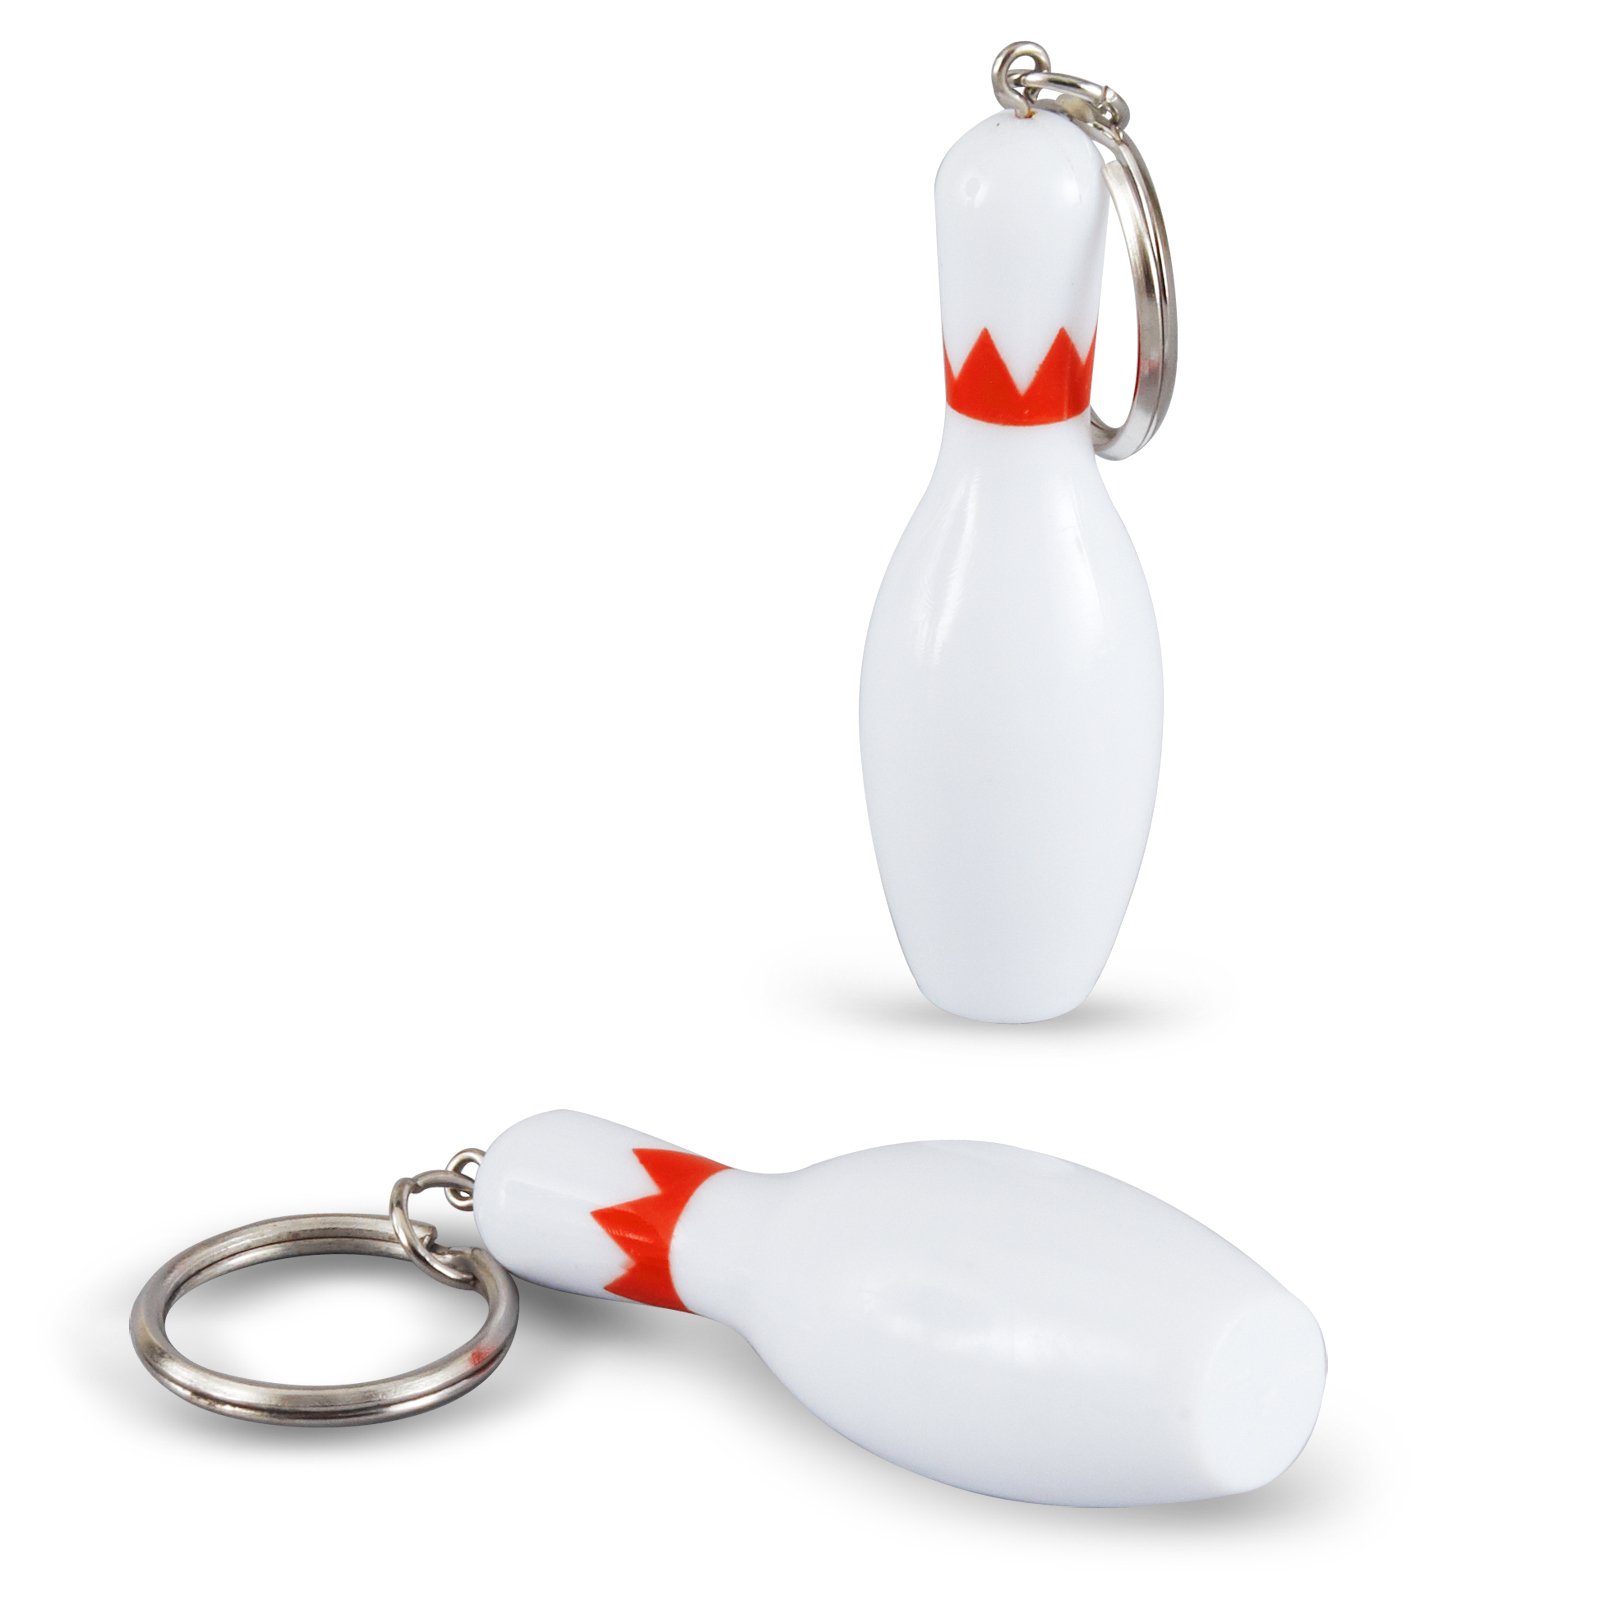 Bowling Keychains (8 count)